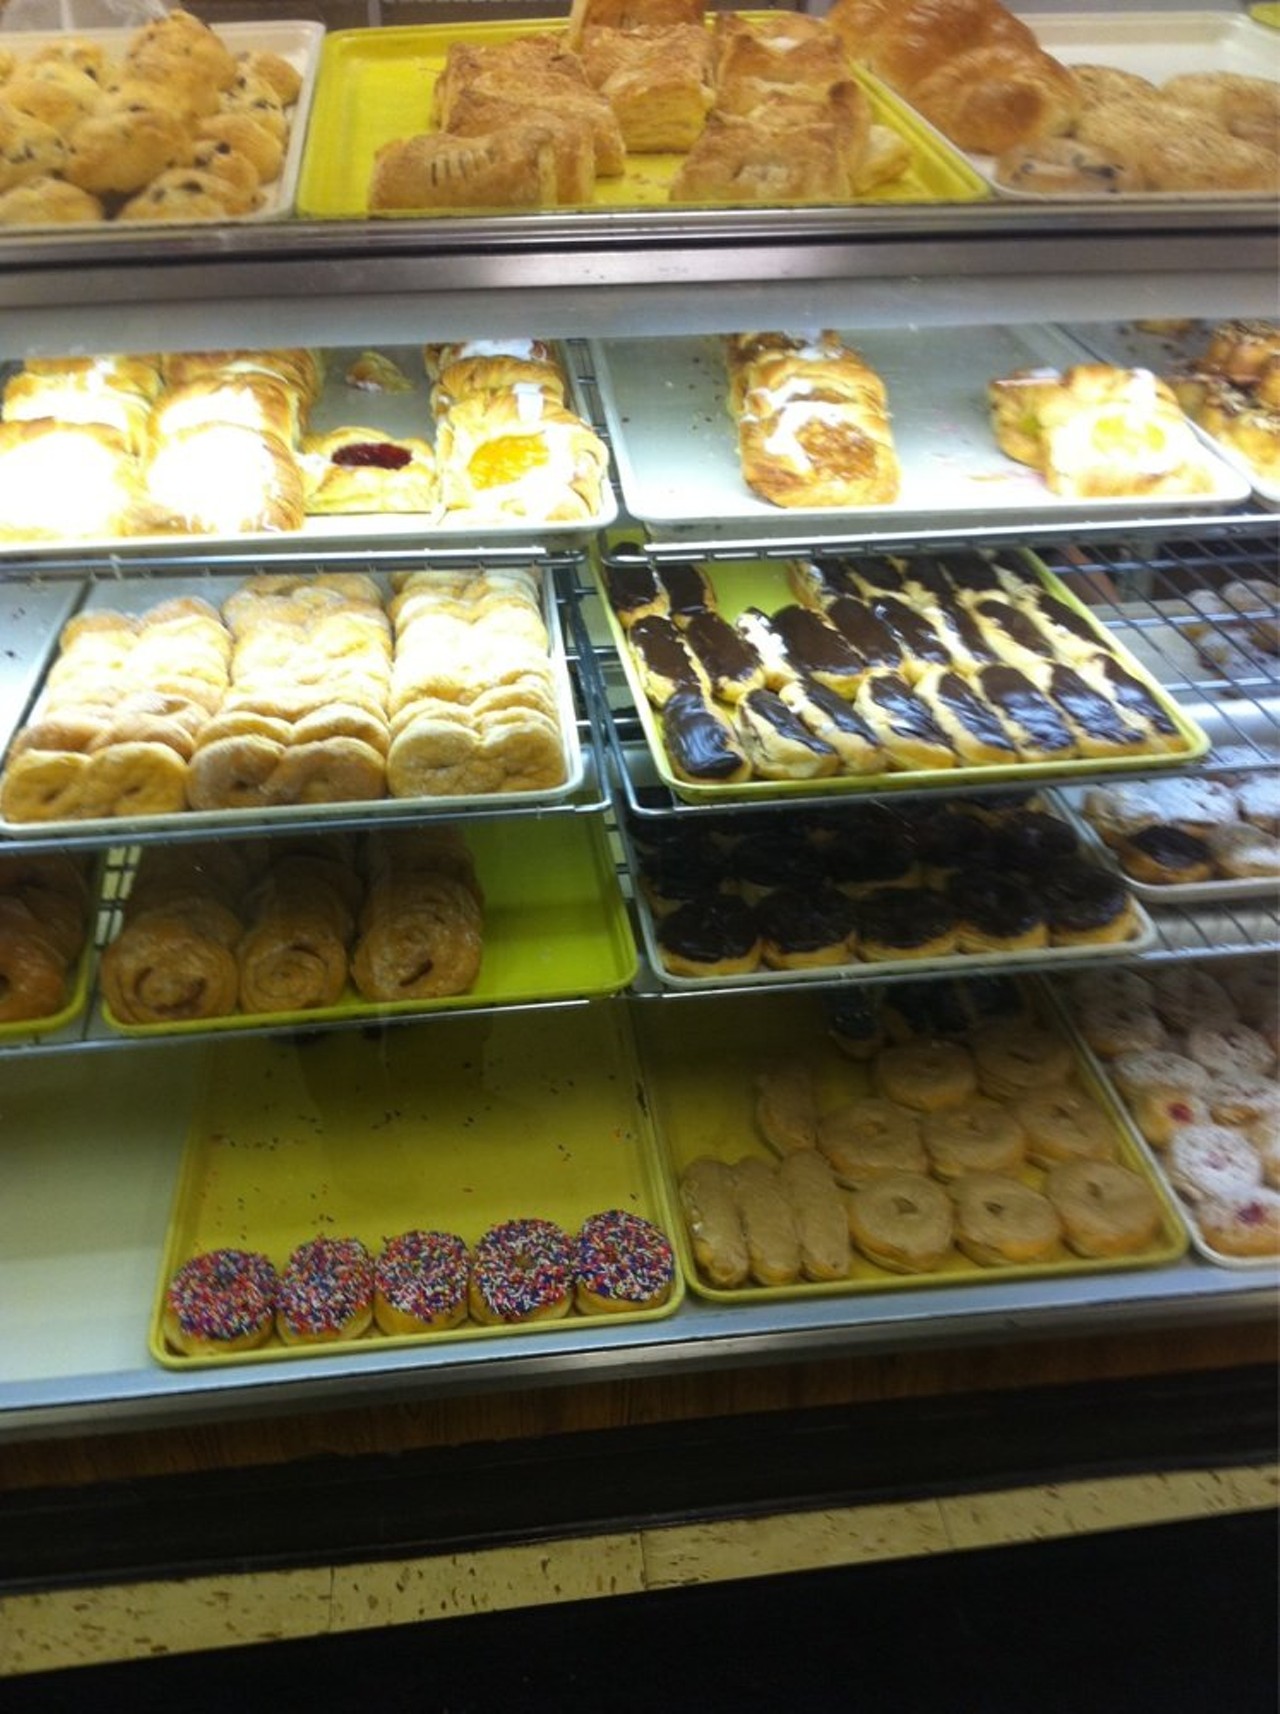 Fragapane Bakeries | 28625 Lorain Rd
North Olmsted